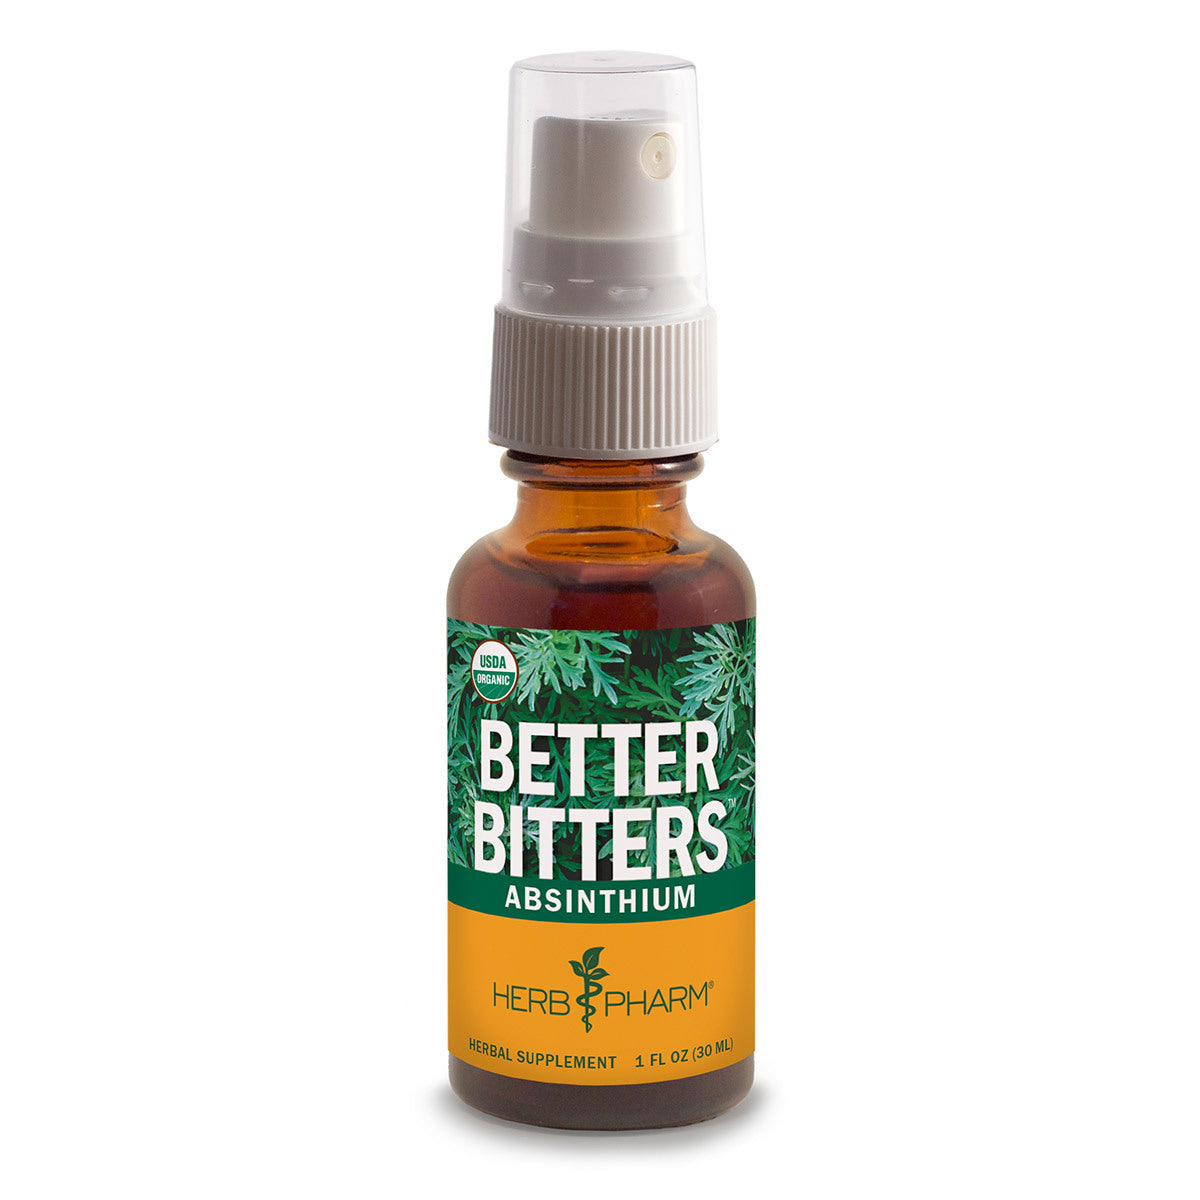 Primary image of Better Bitters - Absinthium